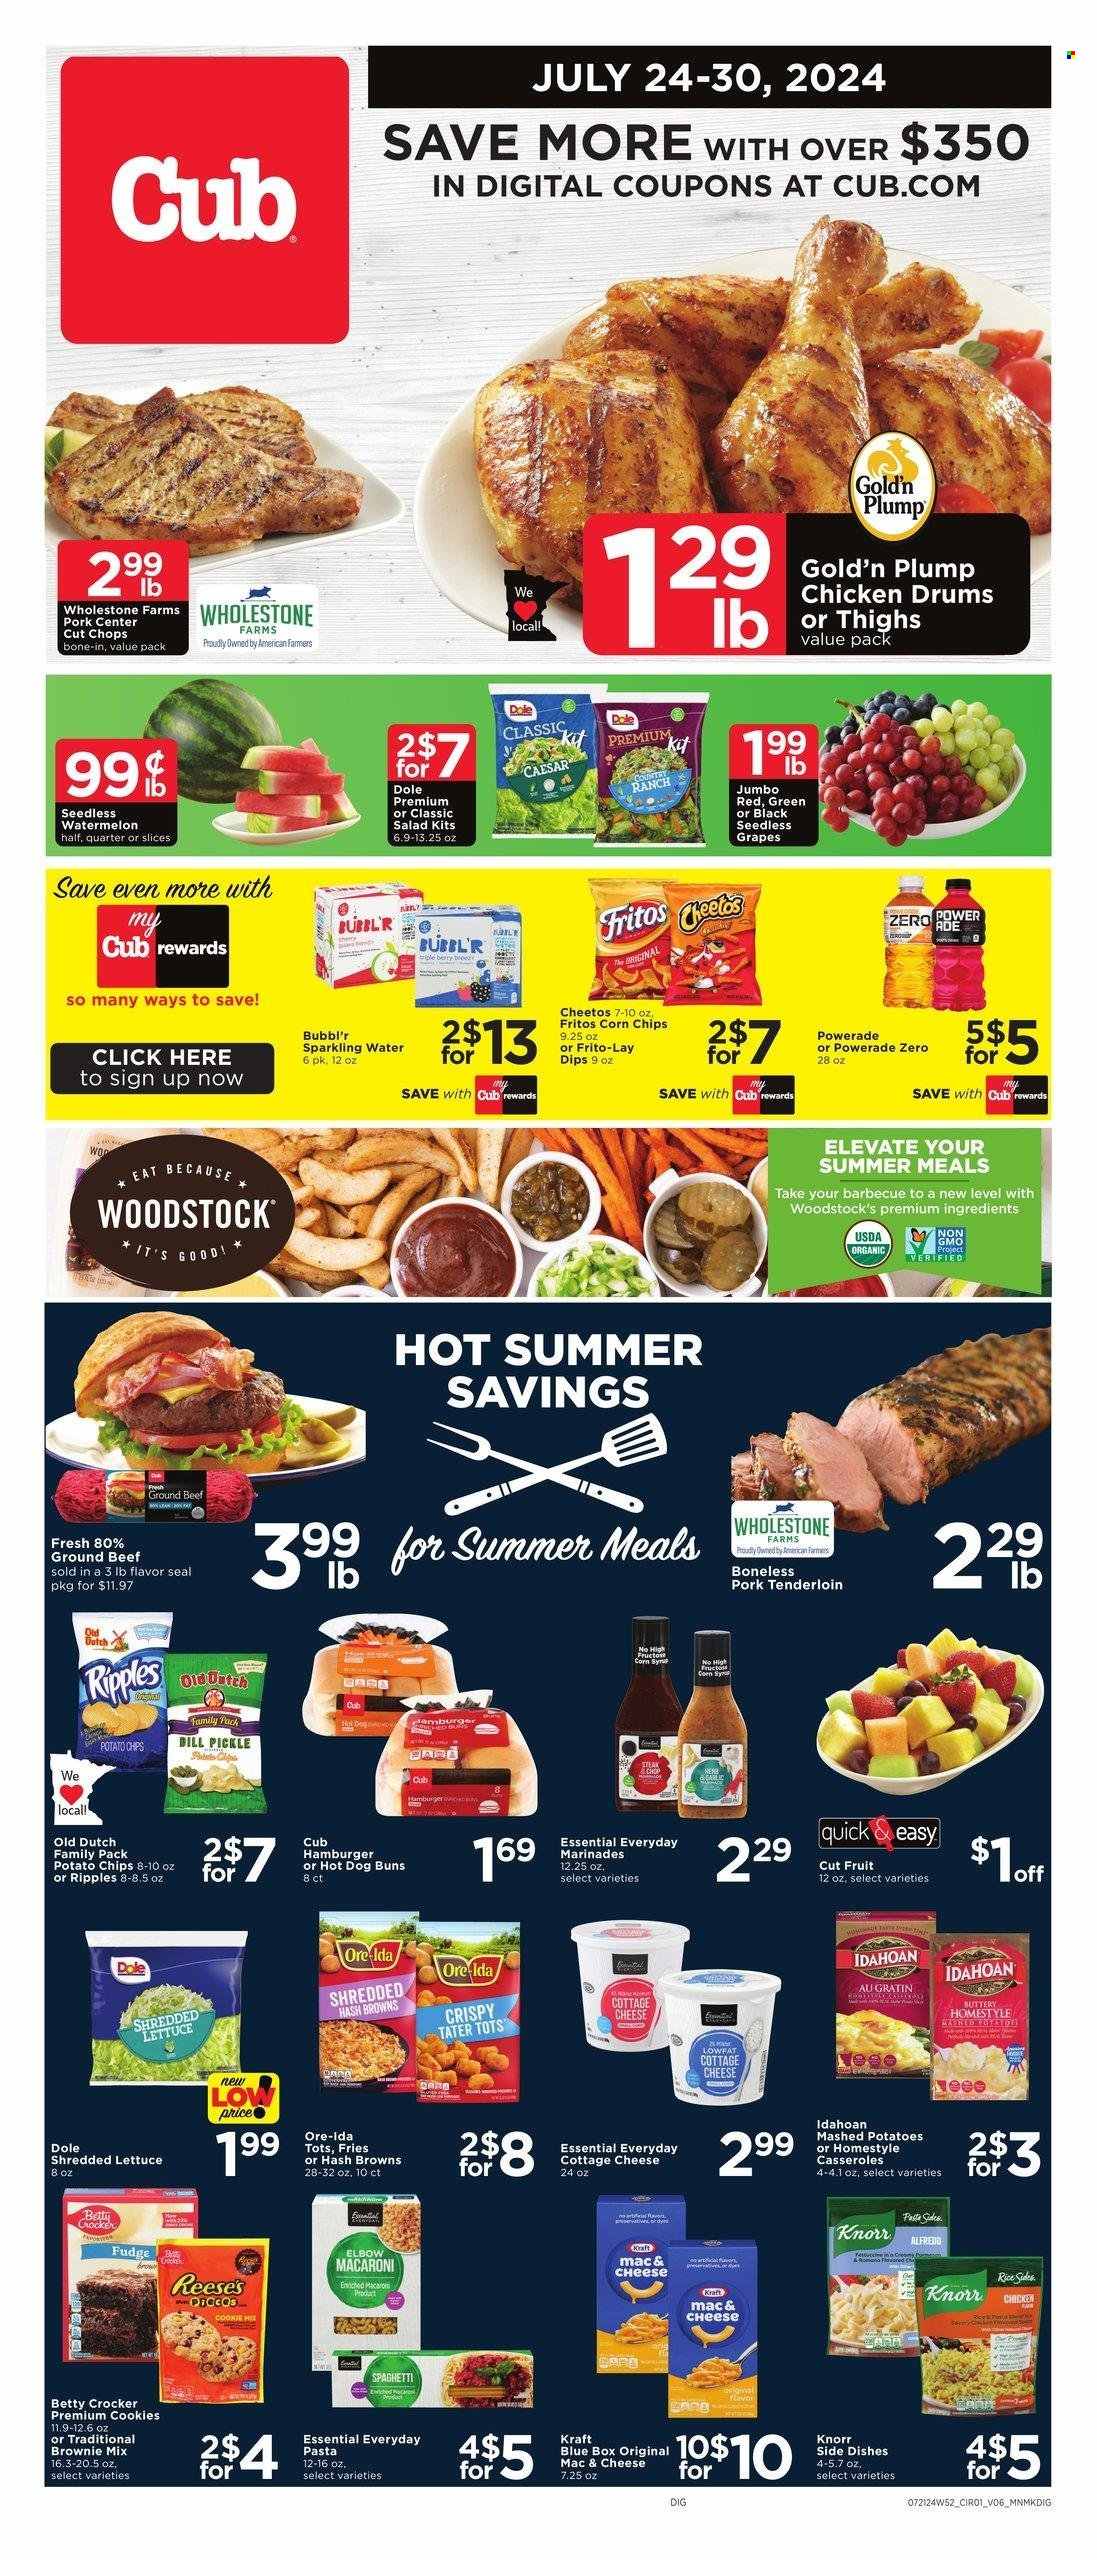 thumbnail - Cub Foods Flyer - 07/24/2024 - 07/30/2024 - Sales products - hot dog rolls, buns, burger buns, brownie mix, Dole, shredded lettuce, grapes, seedless grapes, mac and cheese, mashed potatoes, spaghetti, macaroni, Knorr, pasta sides, Kraft®, ready meal, rice sides, cottage cheese, Reese's, hash browns, potato fries, Ore-Ida, tater tots, Fritos, potato chips, Cheetos, chips, corn chips, Frito-Lay, salty snack, baking mix, marinade, corn syrup, syrup, Powerade, energy drink, antioxidant drink, sparkling water, water, beef meat, ground beef, pork meat, pork tenderloin. Page 1.